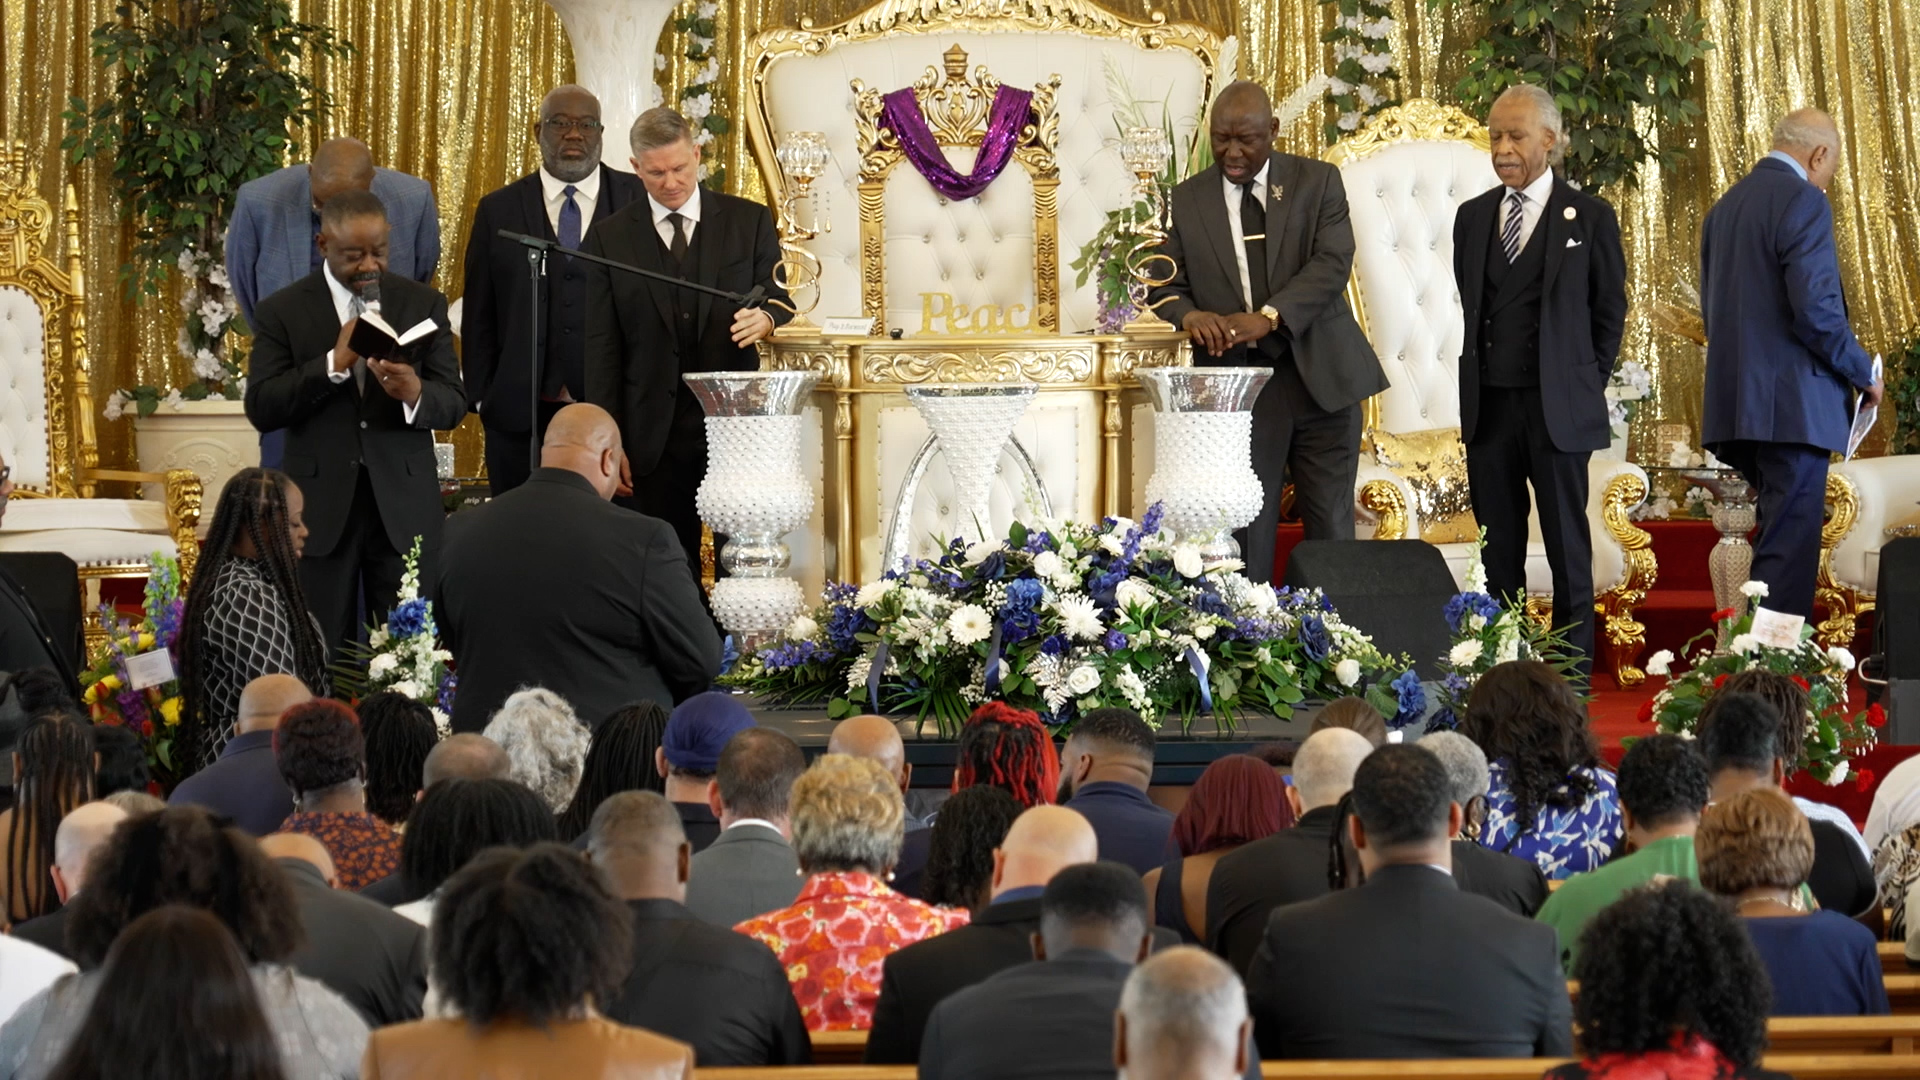 Black man killed by an officer in U.S. state of Ohio laid to rest